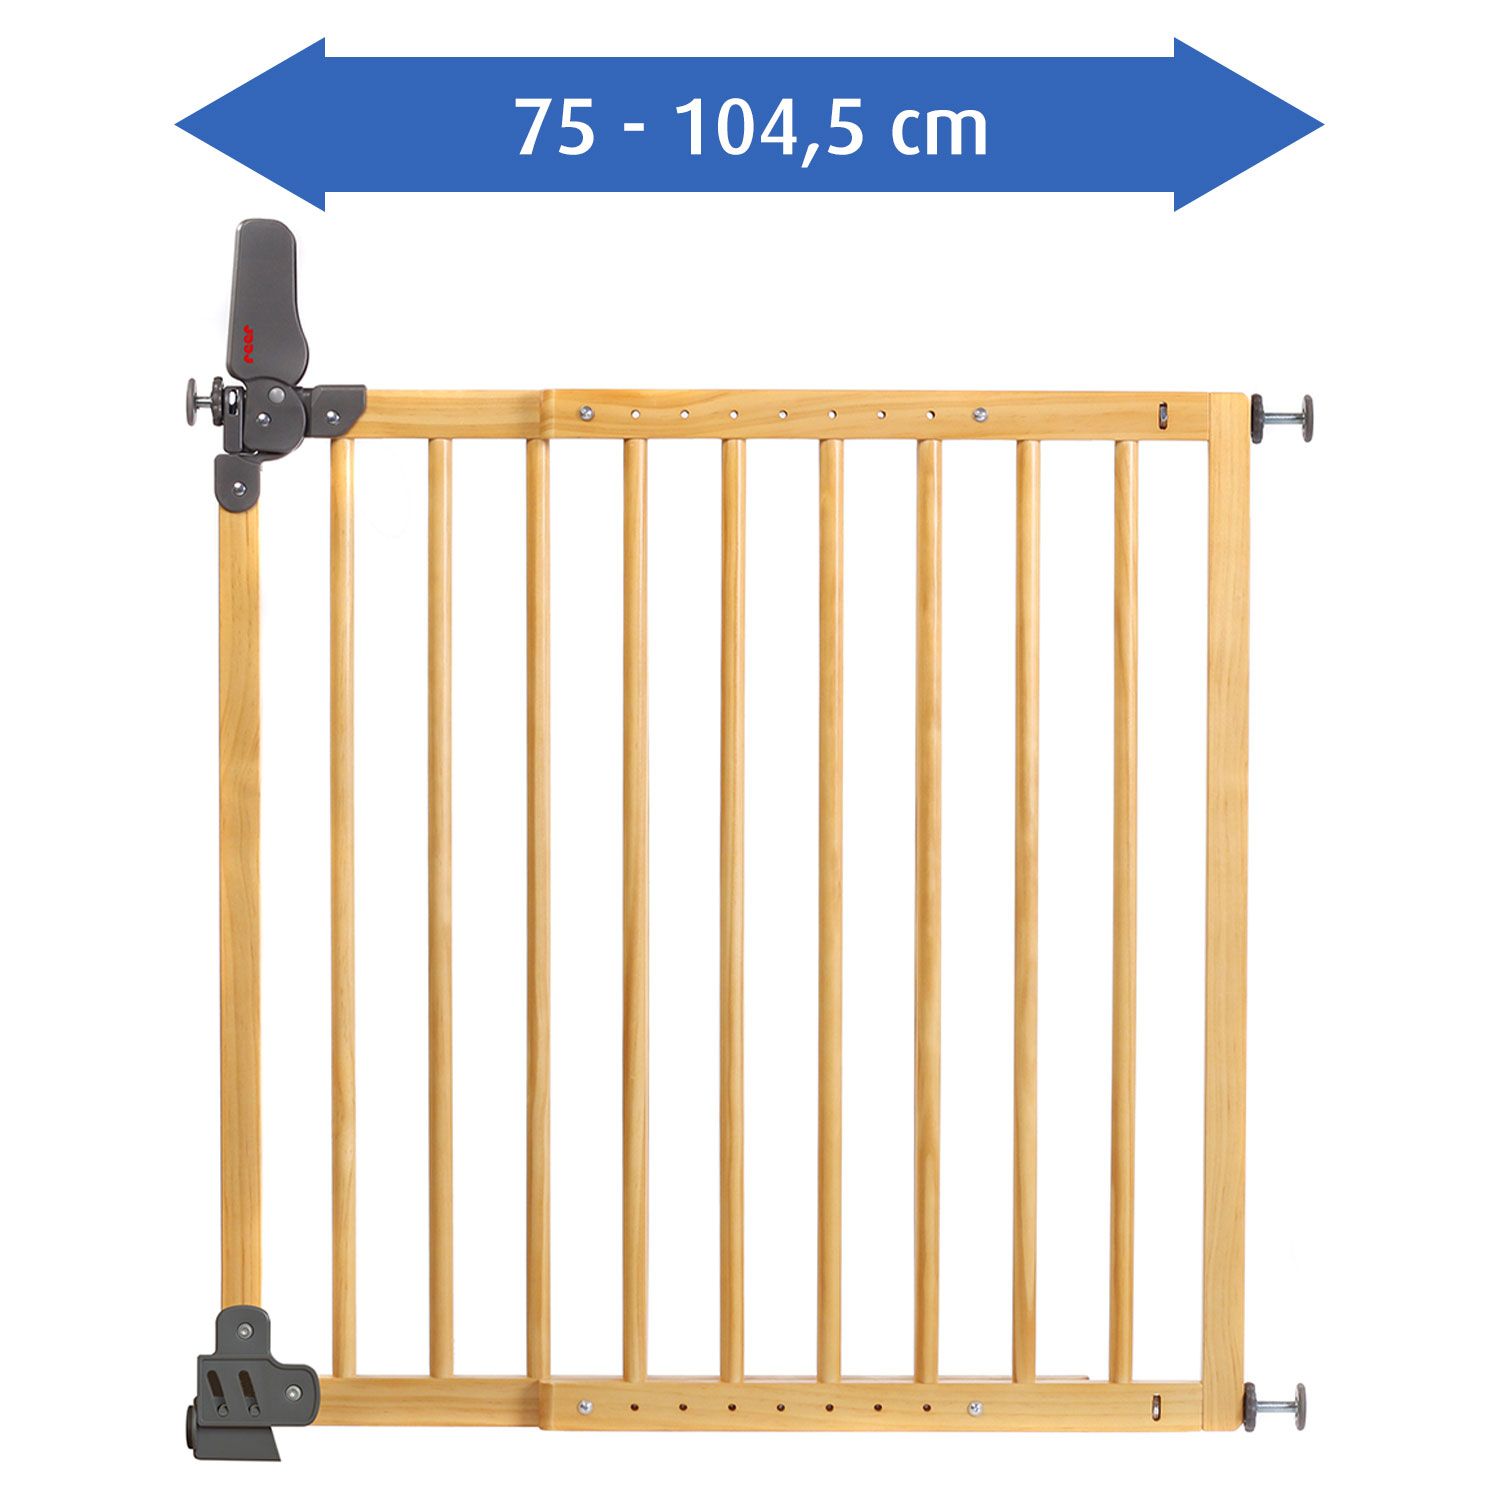 Basic Twin fix gate for gateway widths from 75 to 104.5 cm